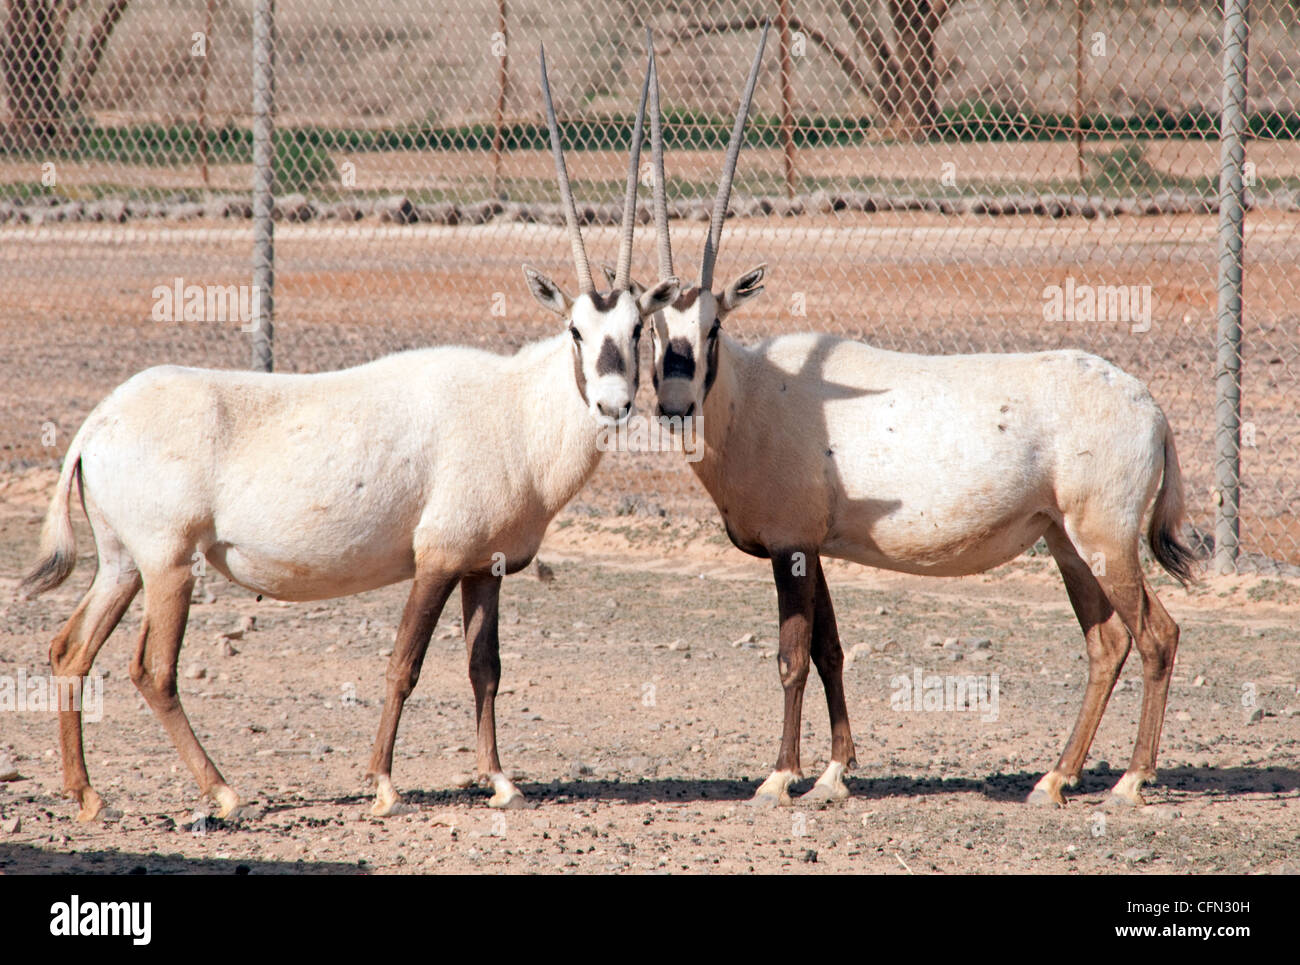 Two rare Arabian Oryx on the Shaumari Wildlife Reserve on the outskirts of Azraq Oasis in the Eastern Desert of the Hashemite Kingdom of Jordan. Stock Photo